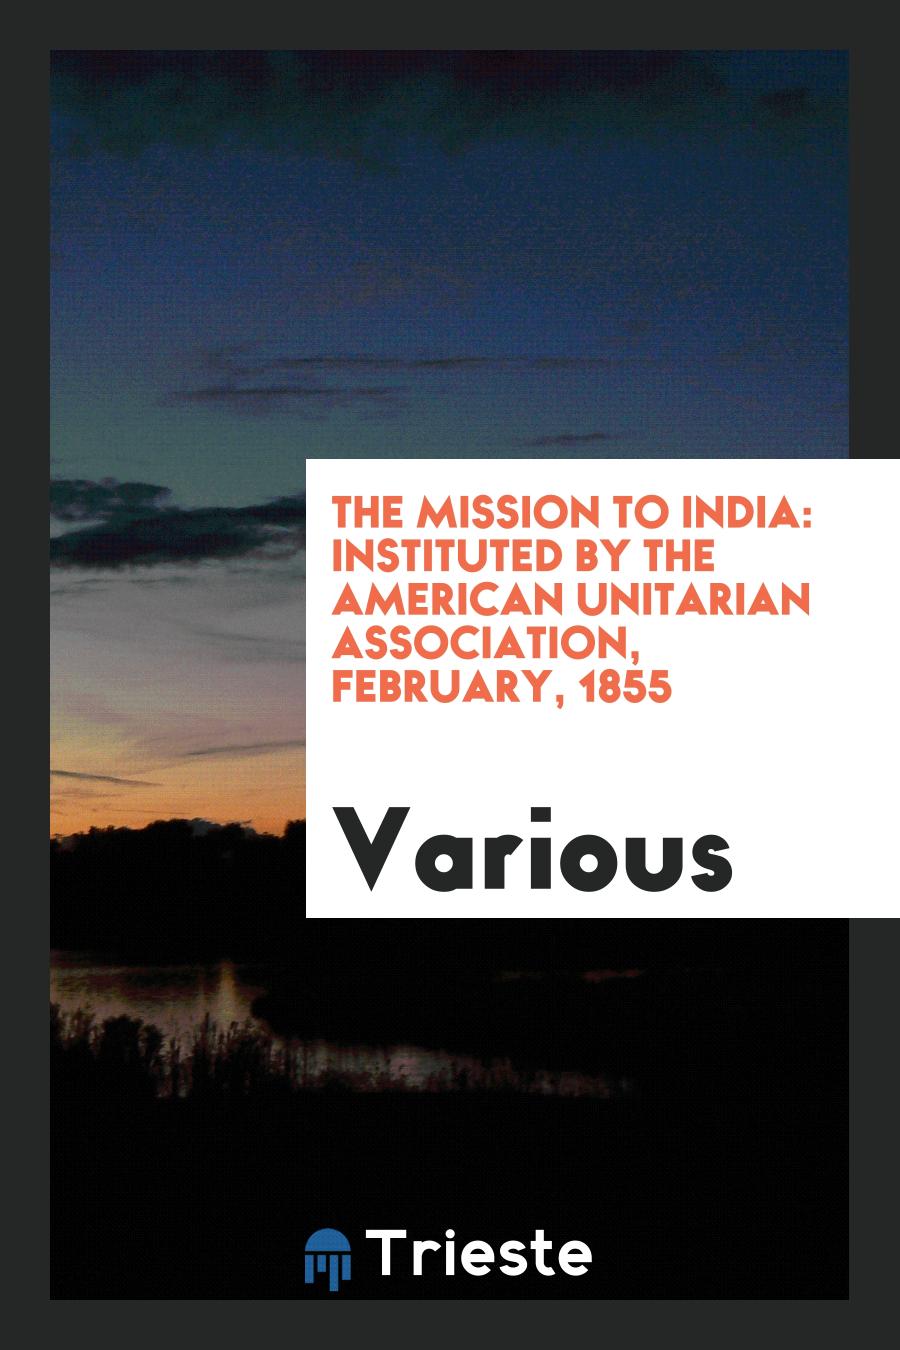 The Mission to India: Instituted by the American Unitarian Association, February, 1855